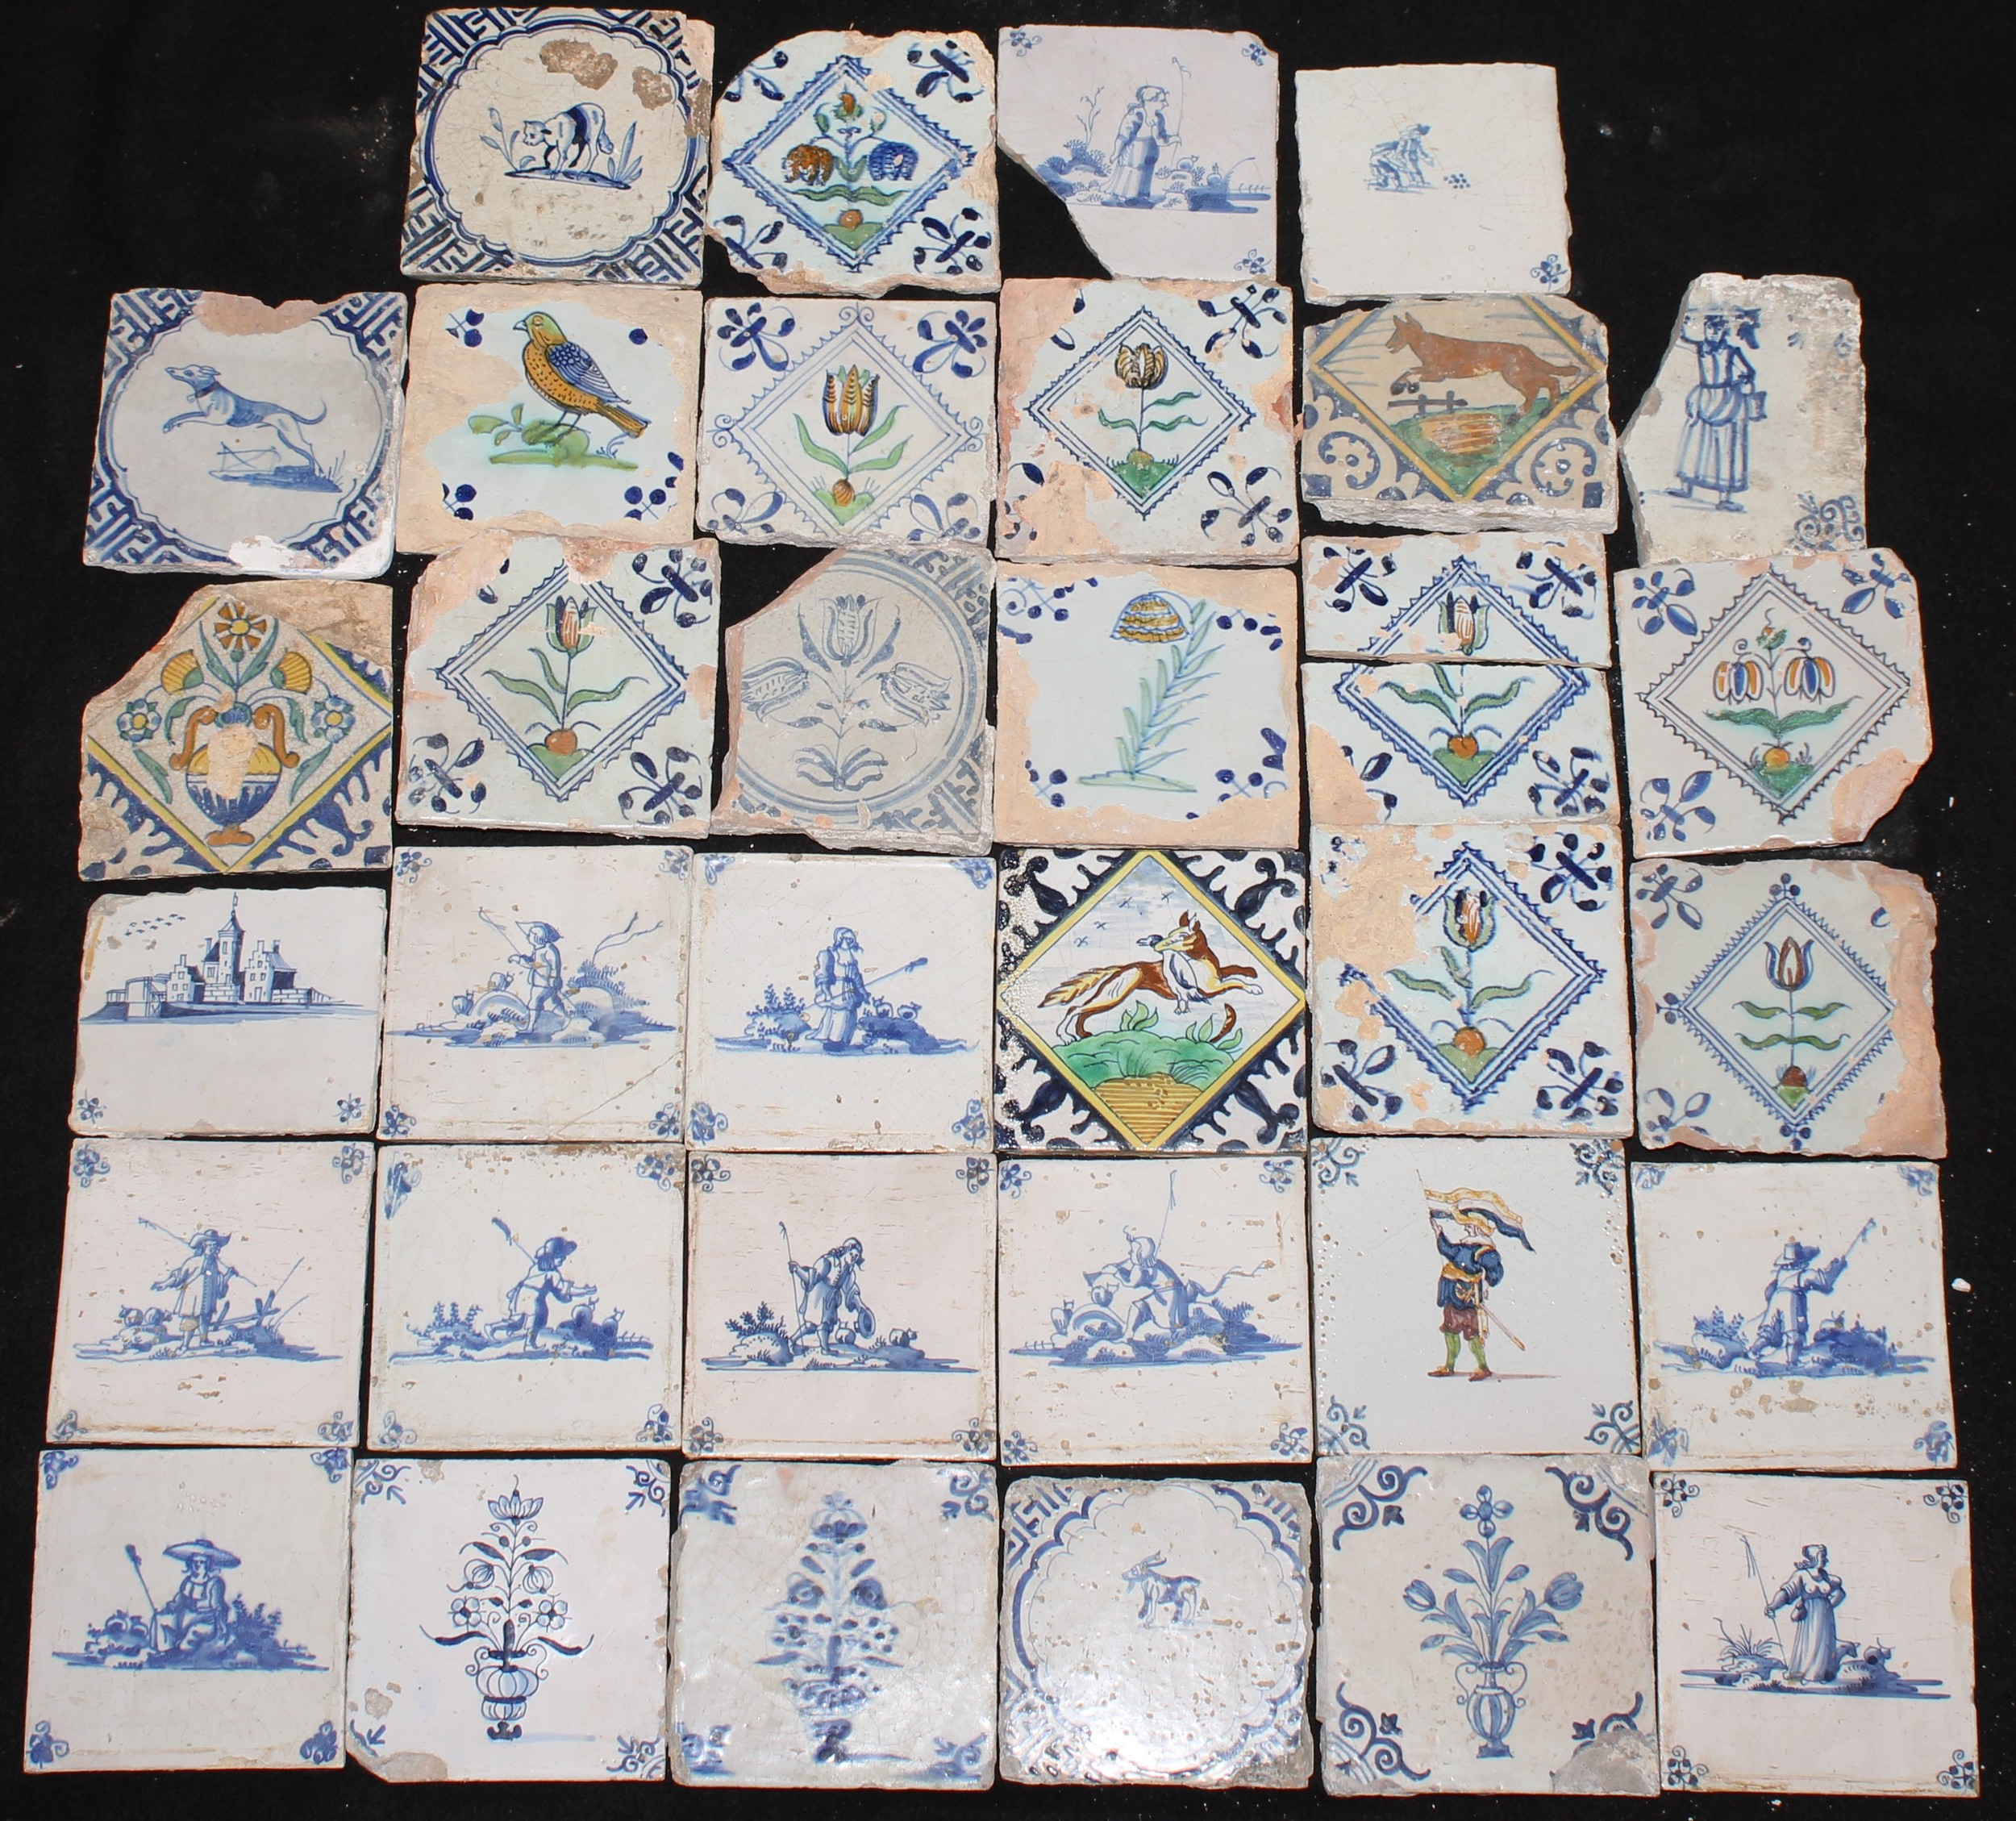 A collection of 18th and 19th century Delft tiles, including polychrome, figures, flora and fauna,